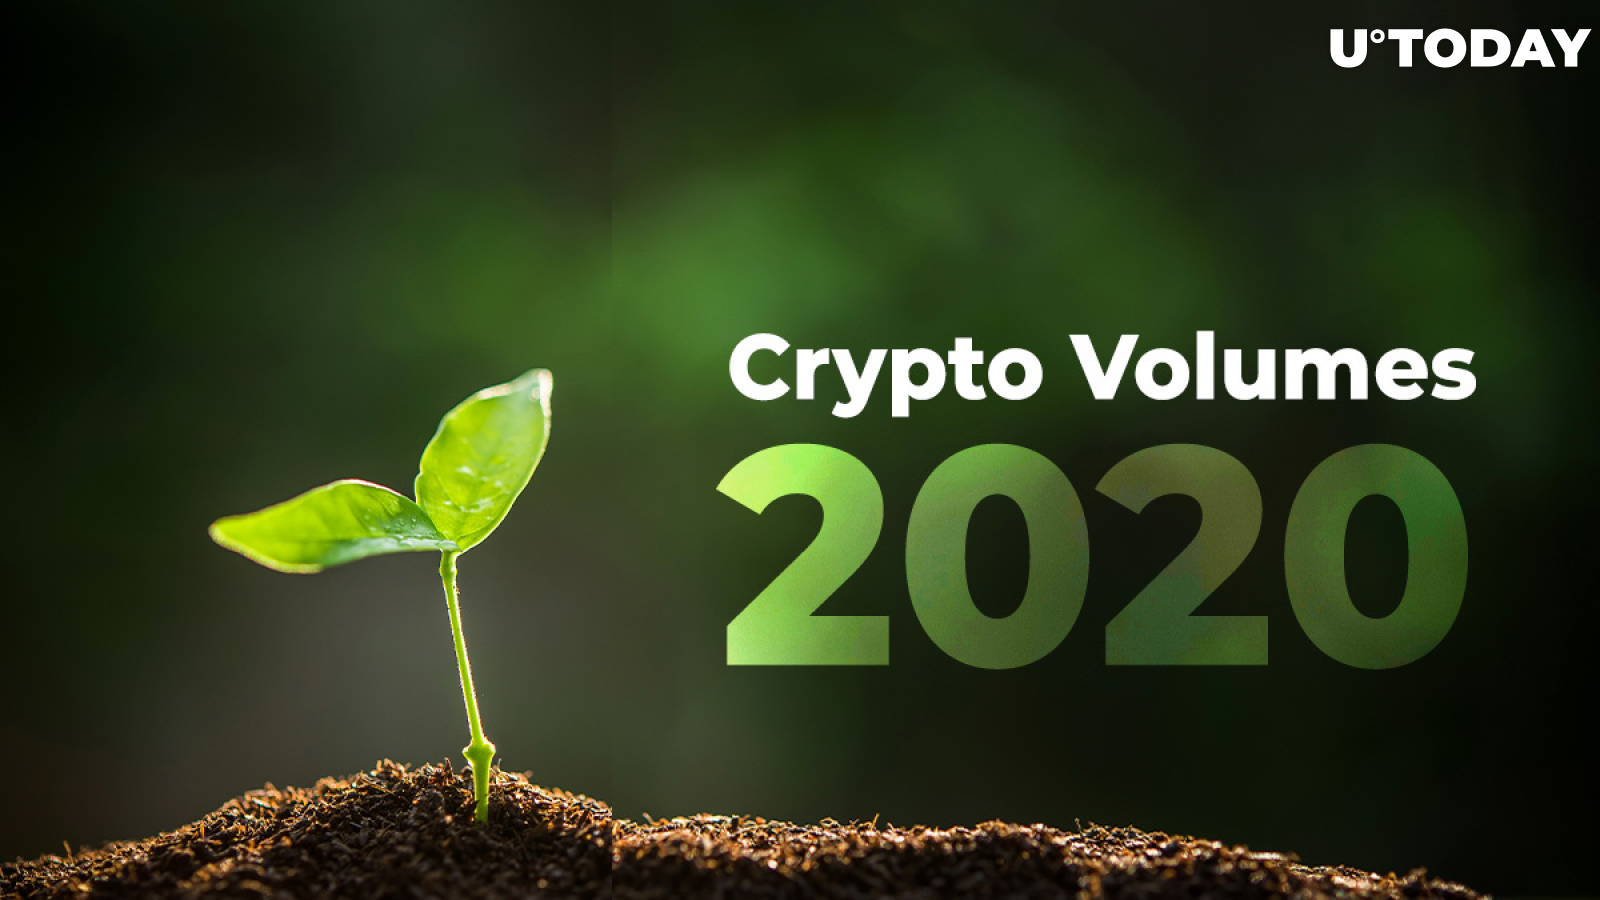 Crypto Volume Continues to Grow in 2020. Is New Bitcoin (BTC) Bull Market Just Starting?